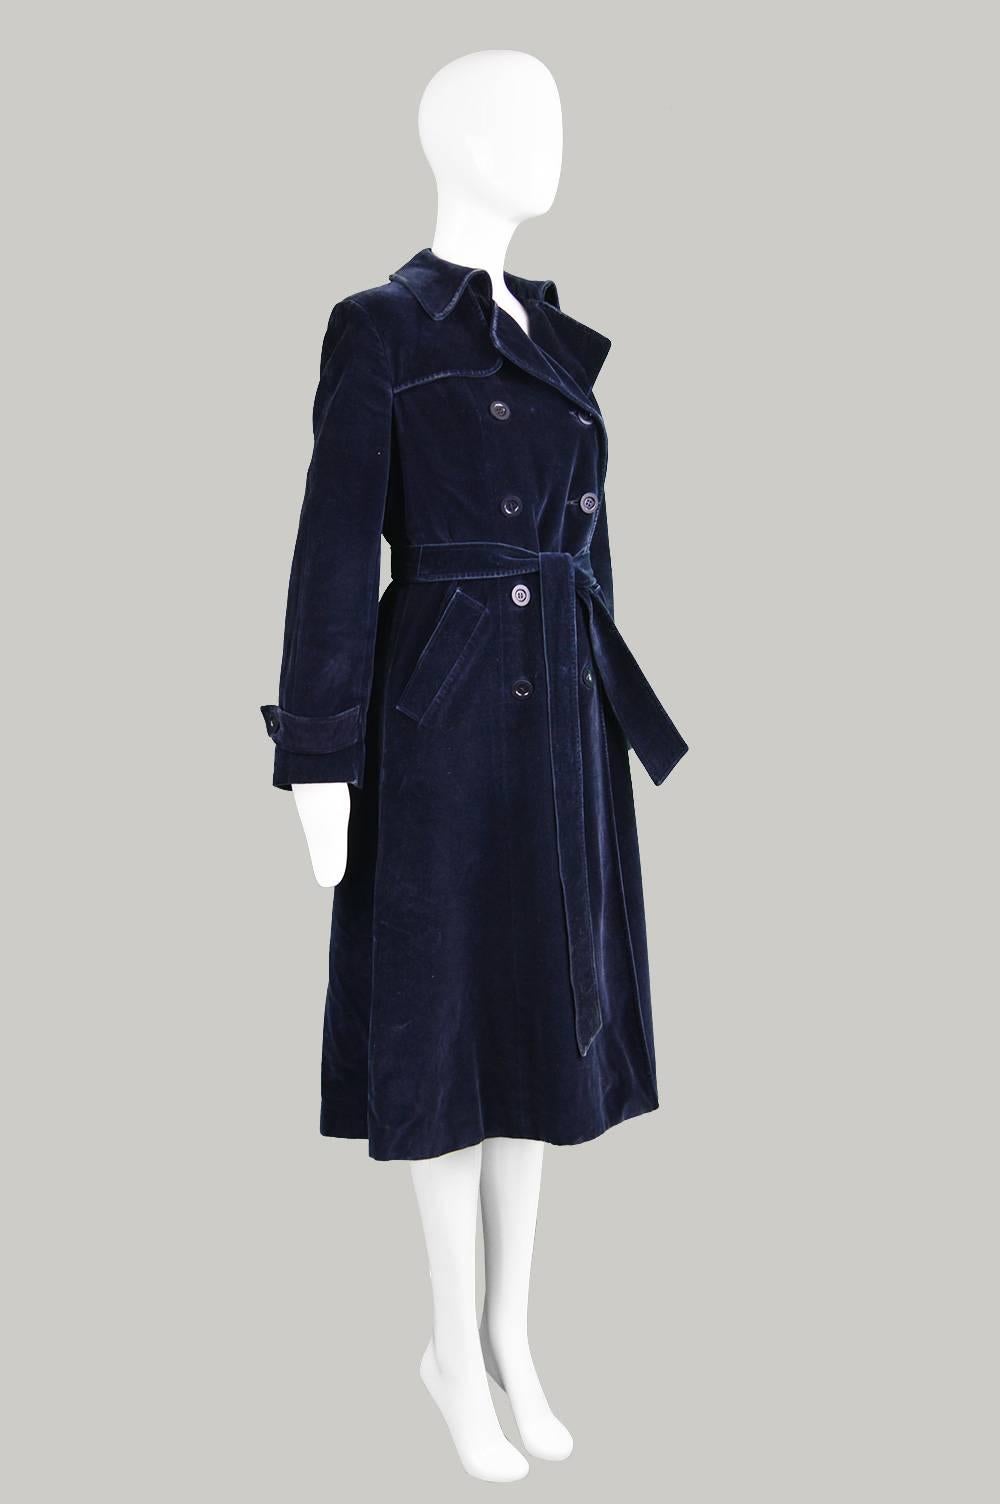 Aquascutum for Harrods Midnight Blue Velvet Peacoat, 1970s In Excellent Condition For Sale In Doncaster, South Yorkshire